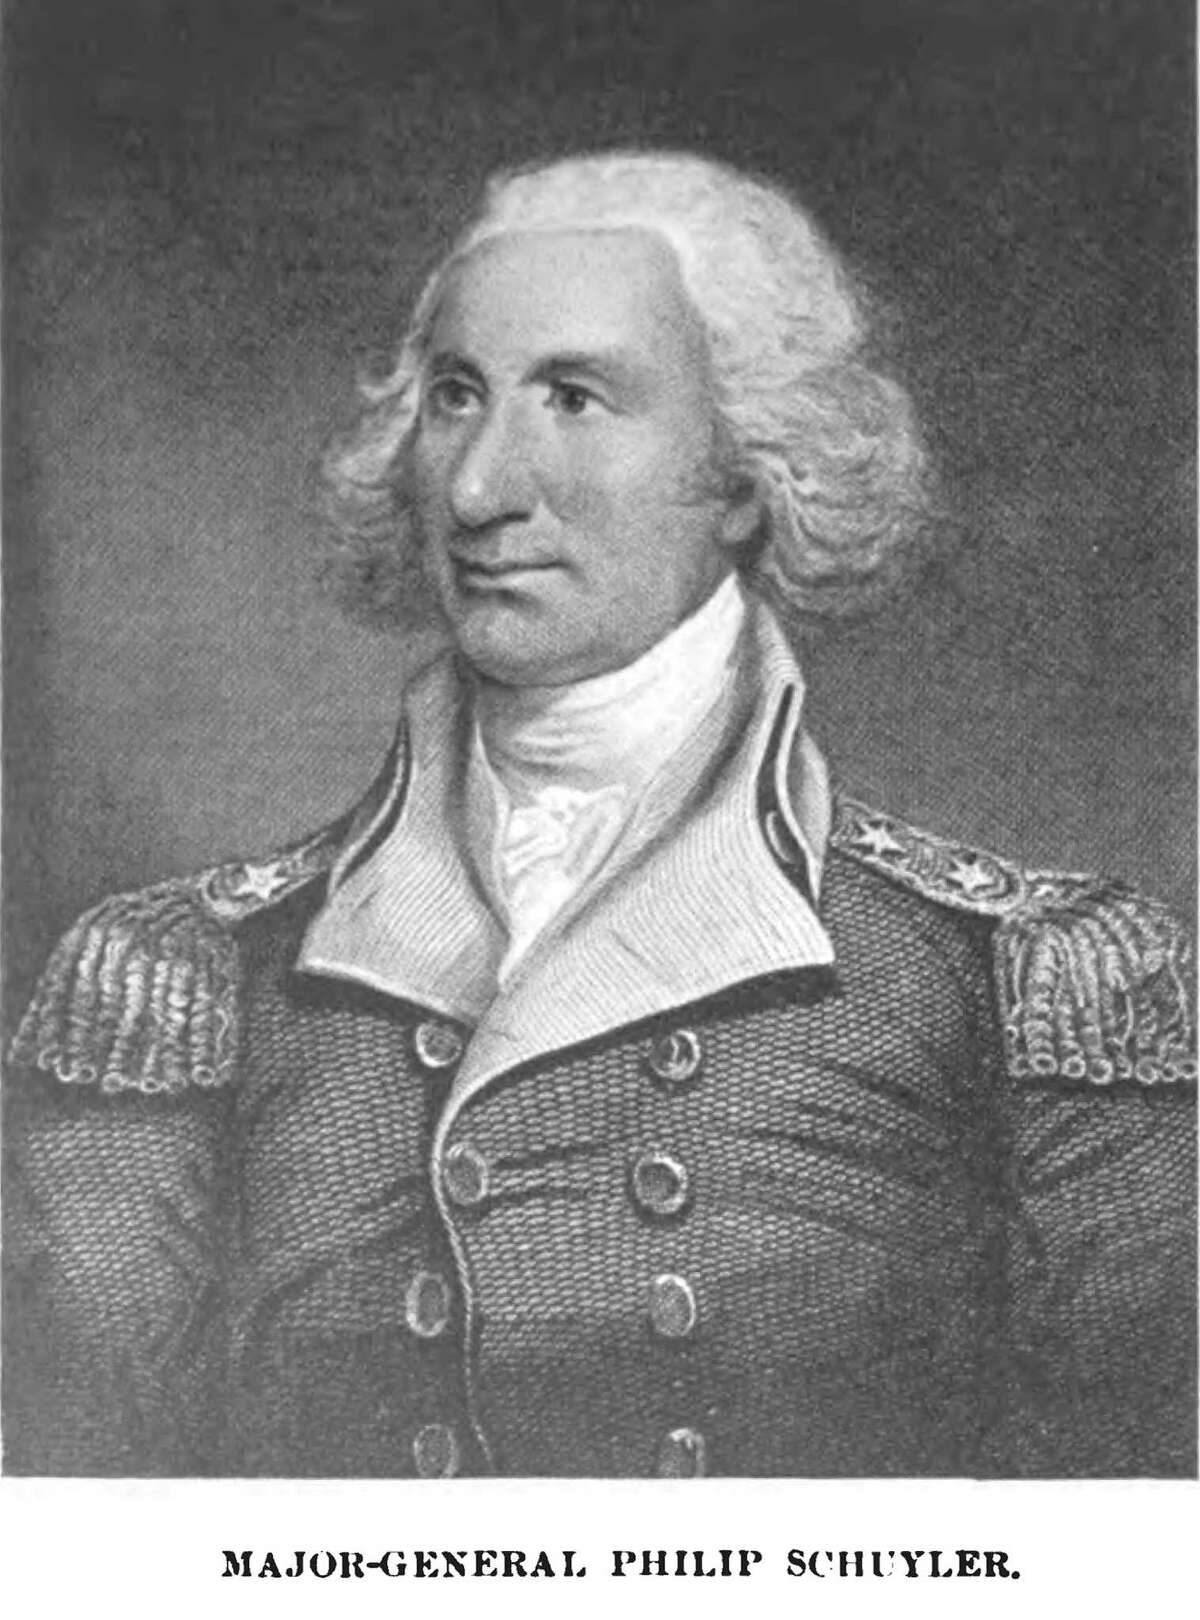 Gen. Philip Schuyler (1733-1804): He was a Revolutionary War hero who served at the Battle of Saratoga. Schuyler was also a representative at the first Continental Congress and was an adviser to George Washington. Read more about Schuyler in our Albany Rural Cemetery section. Photo from Dictionary of American Portraits, New York: Dover, 1967.